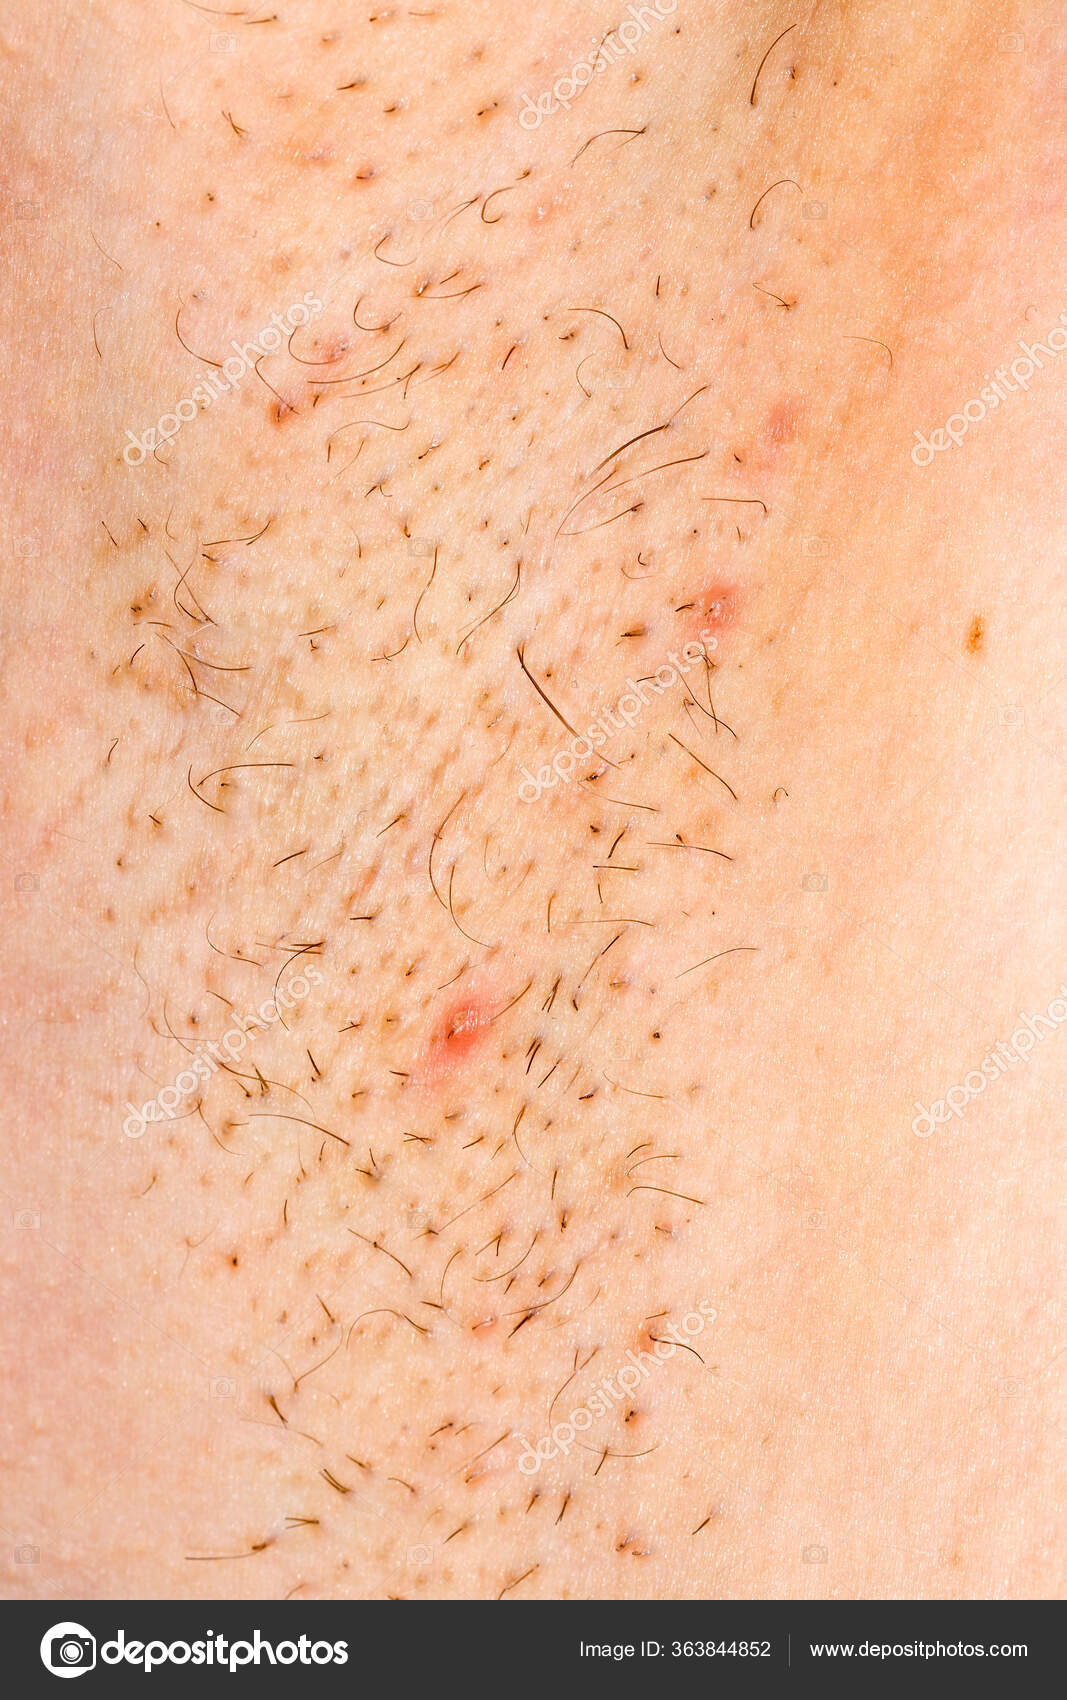 How Do I Prevent Ingrown Beard Hairs with pictures